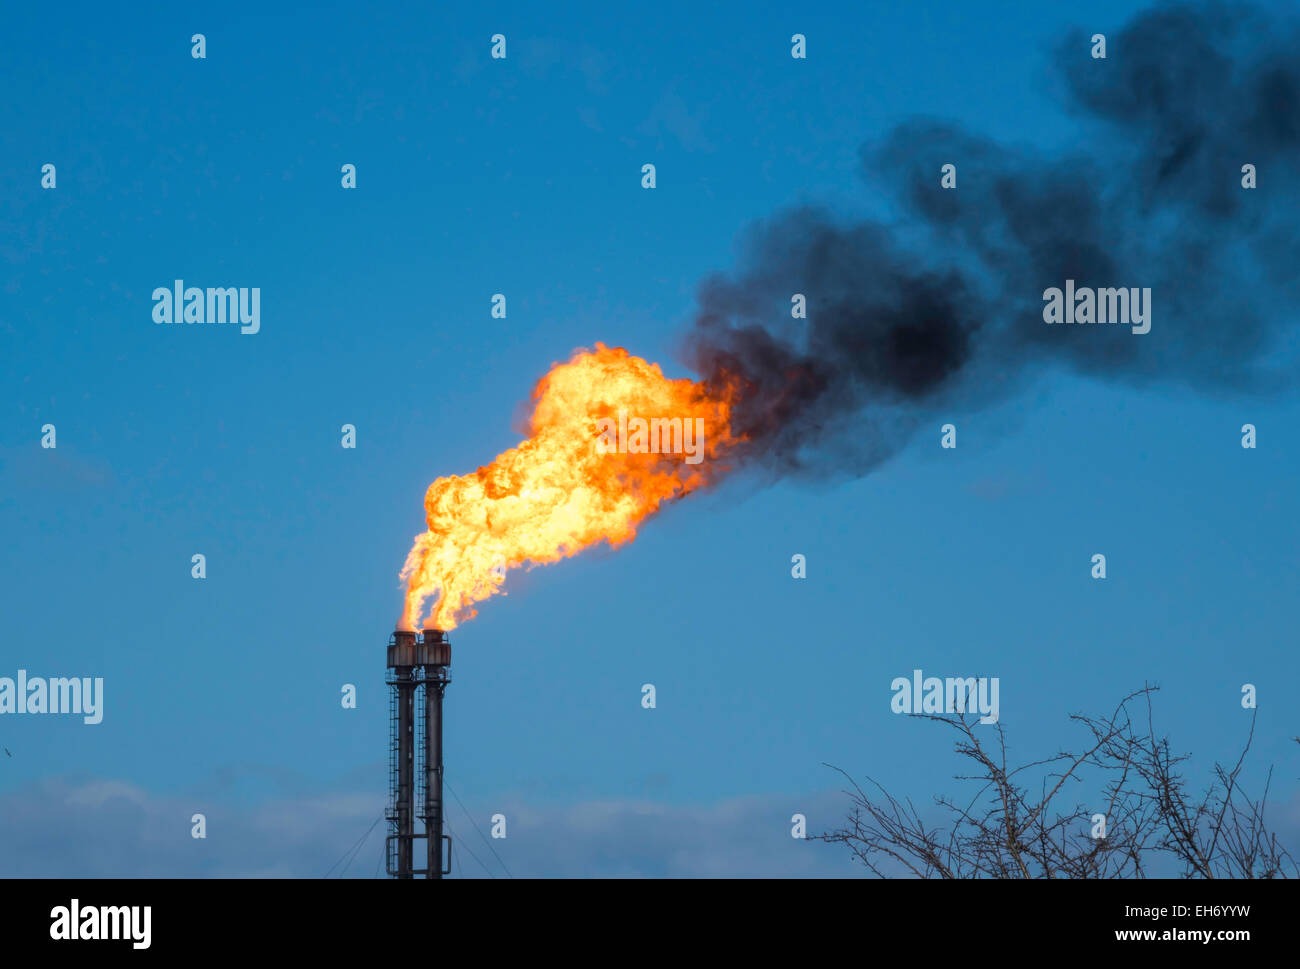 An emergency flare burning at a chemical chemical plant in England UK Stock Photo